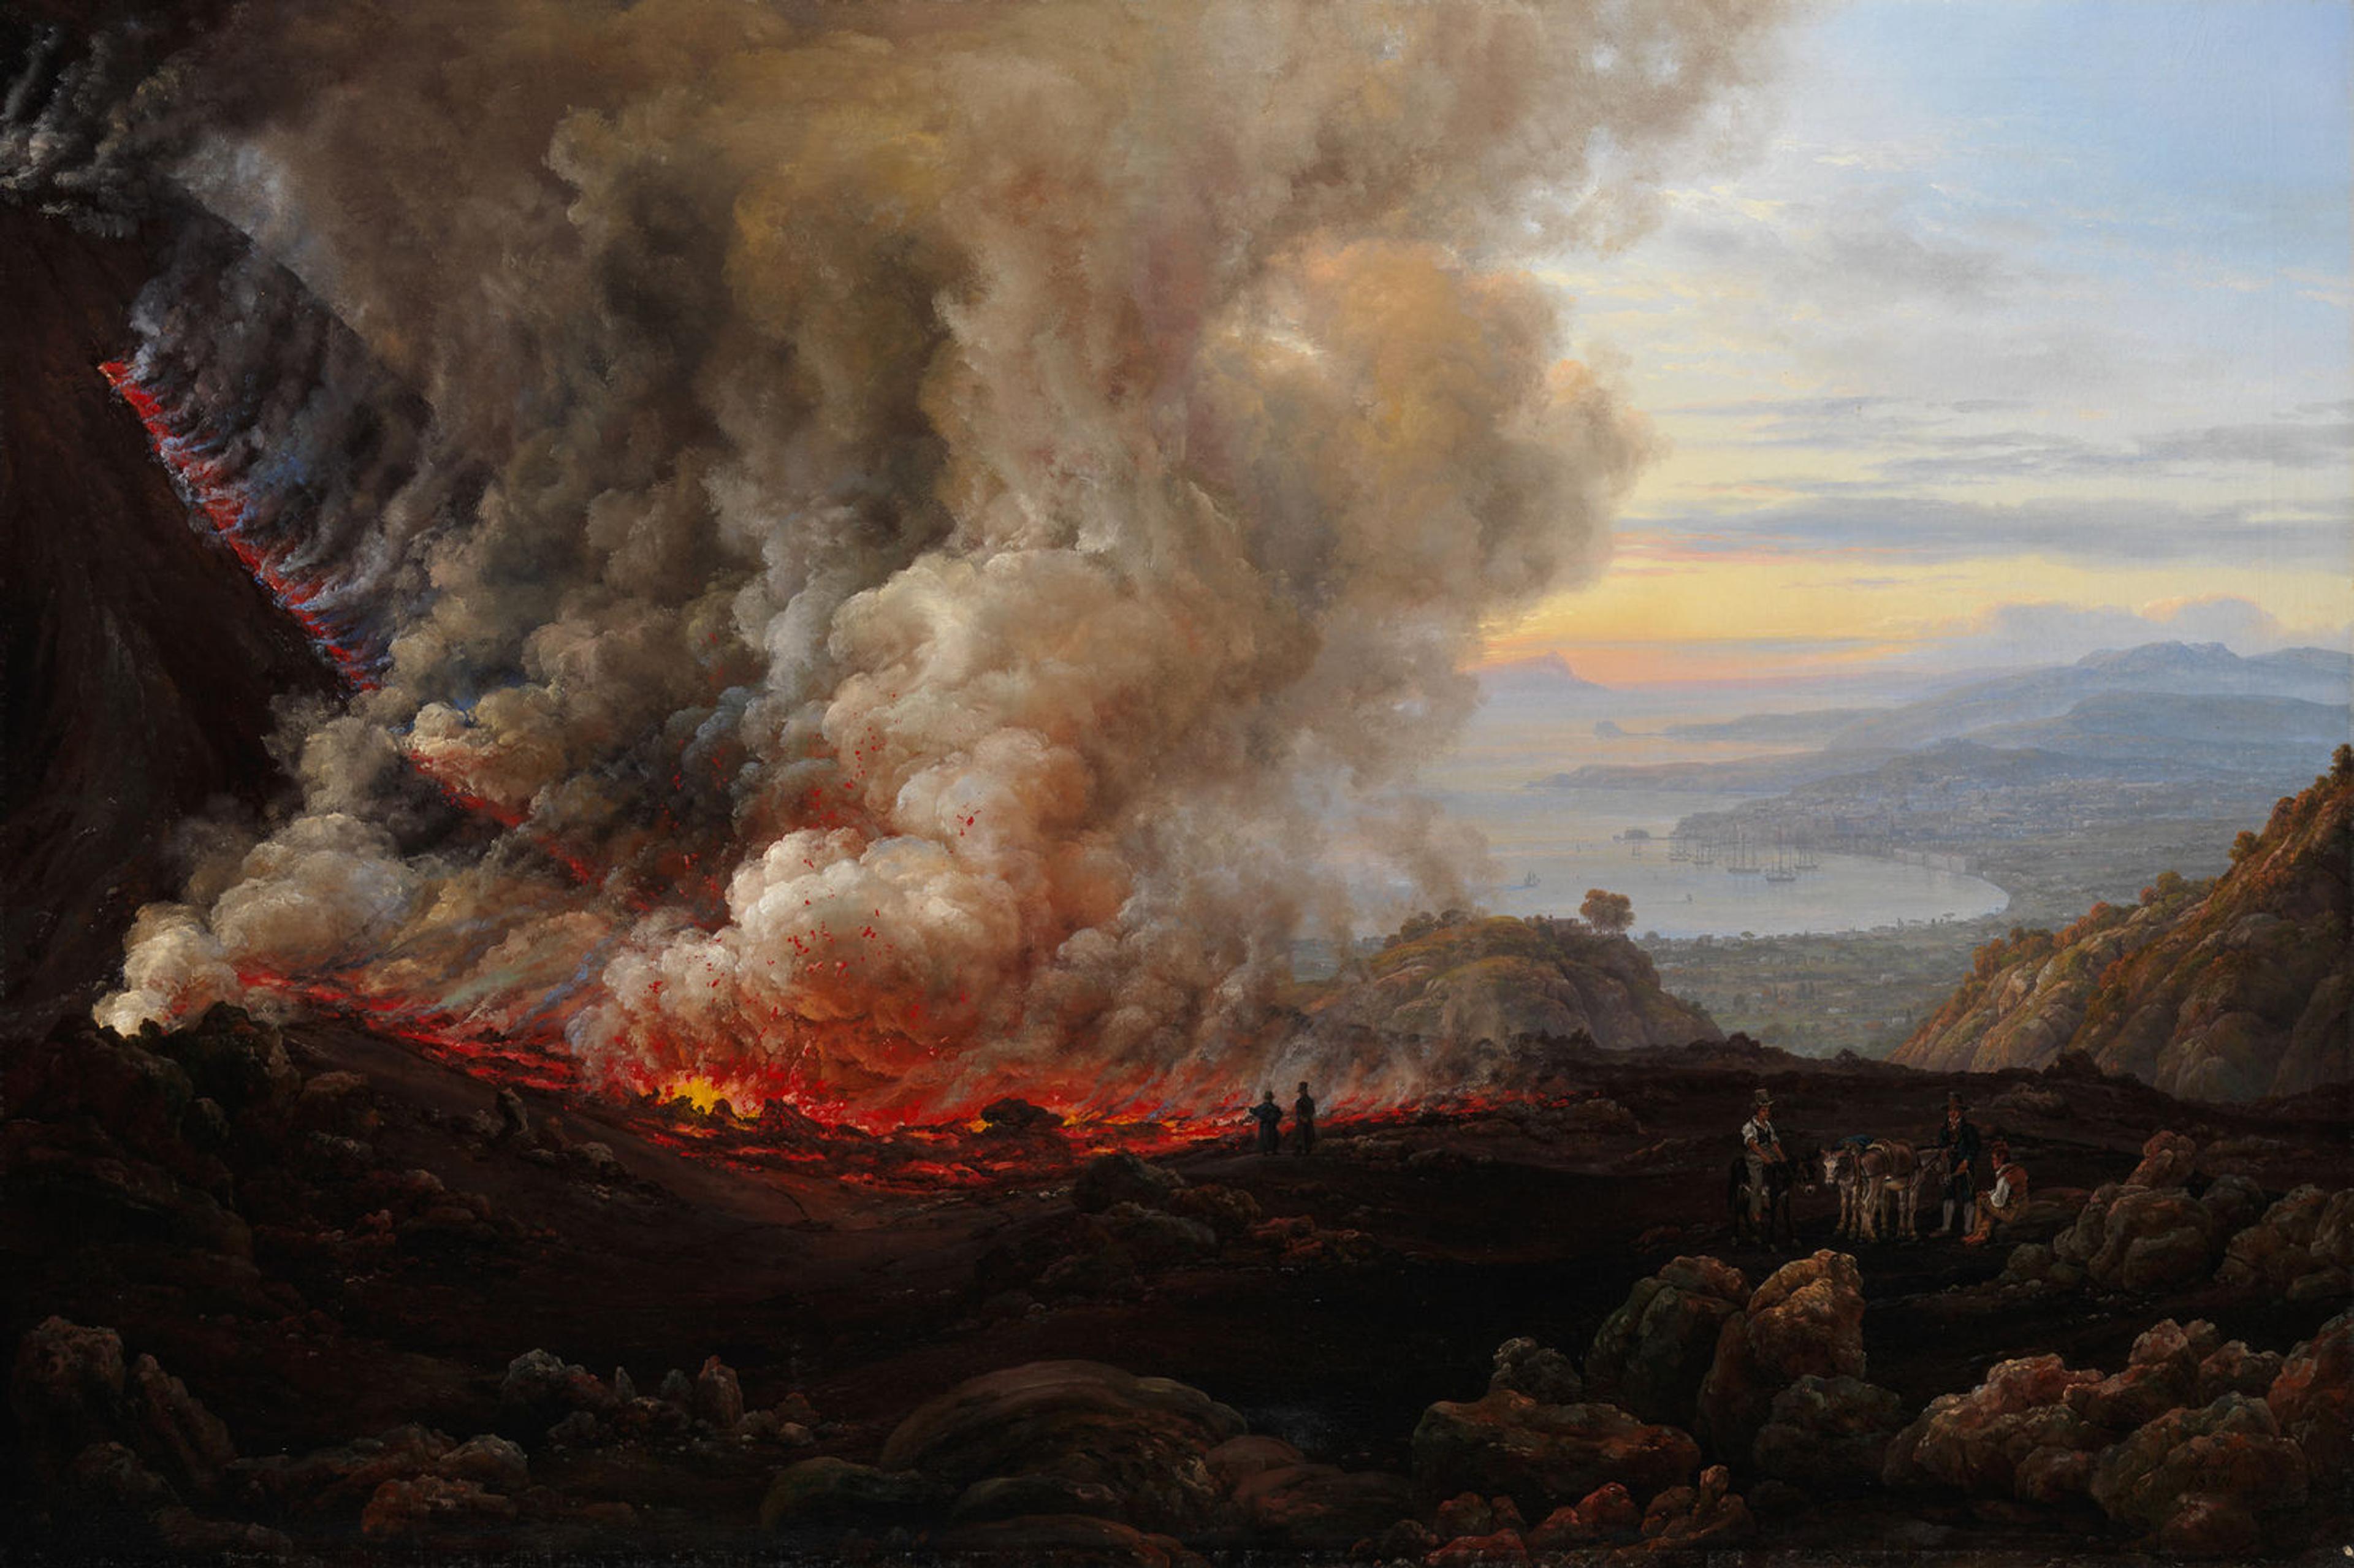 A painting of a fiery eruption, seen from the edge of the volcano's rim. A group of men are seated alongside the crater, and the landscape stretches peacefully beneath the mountain